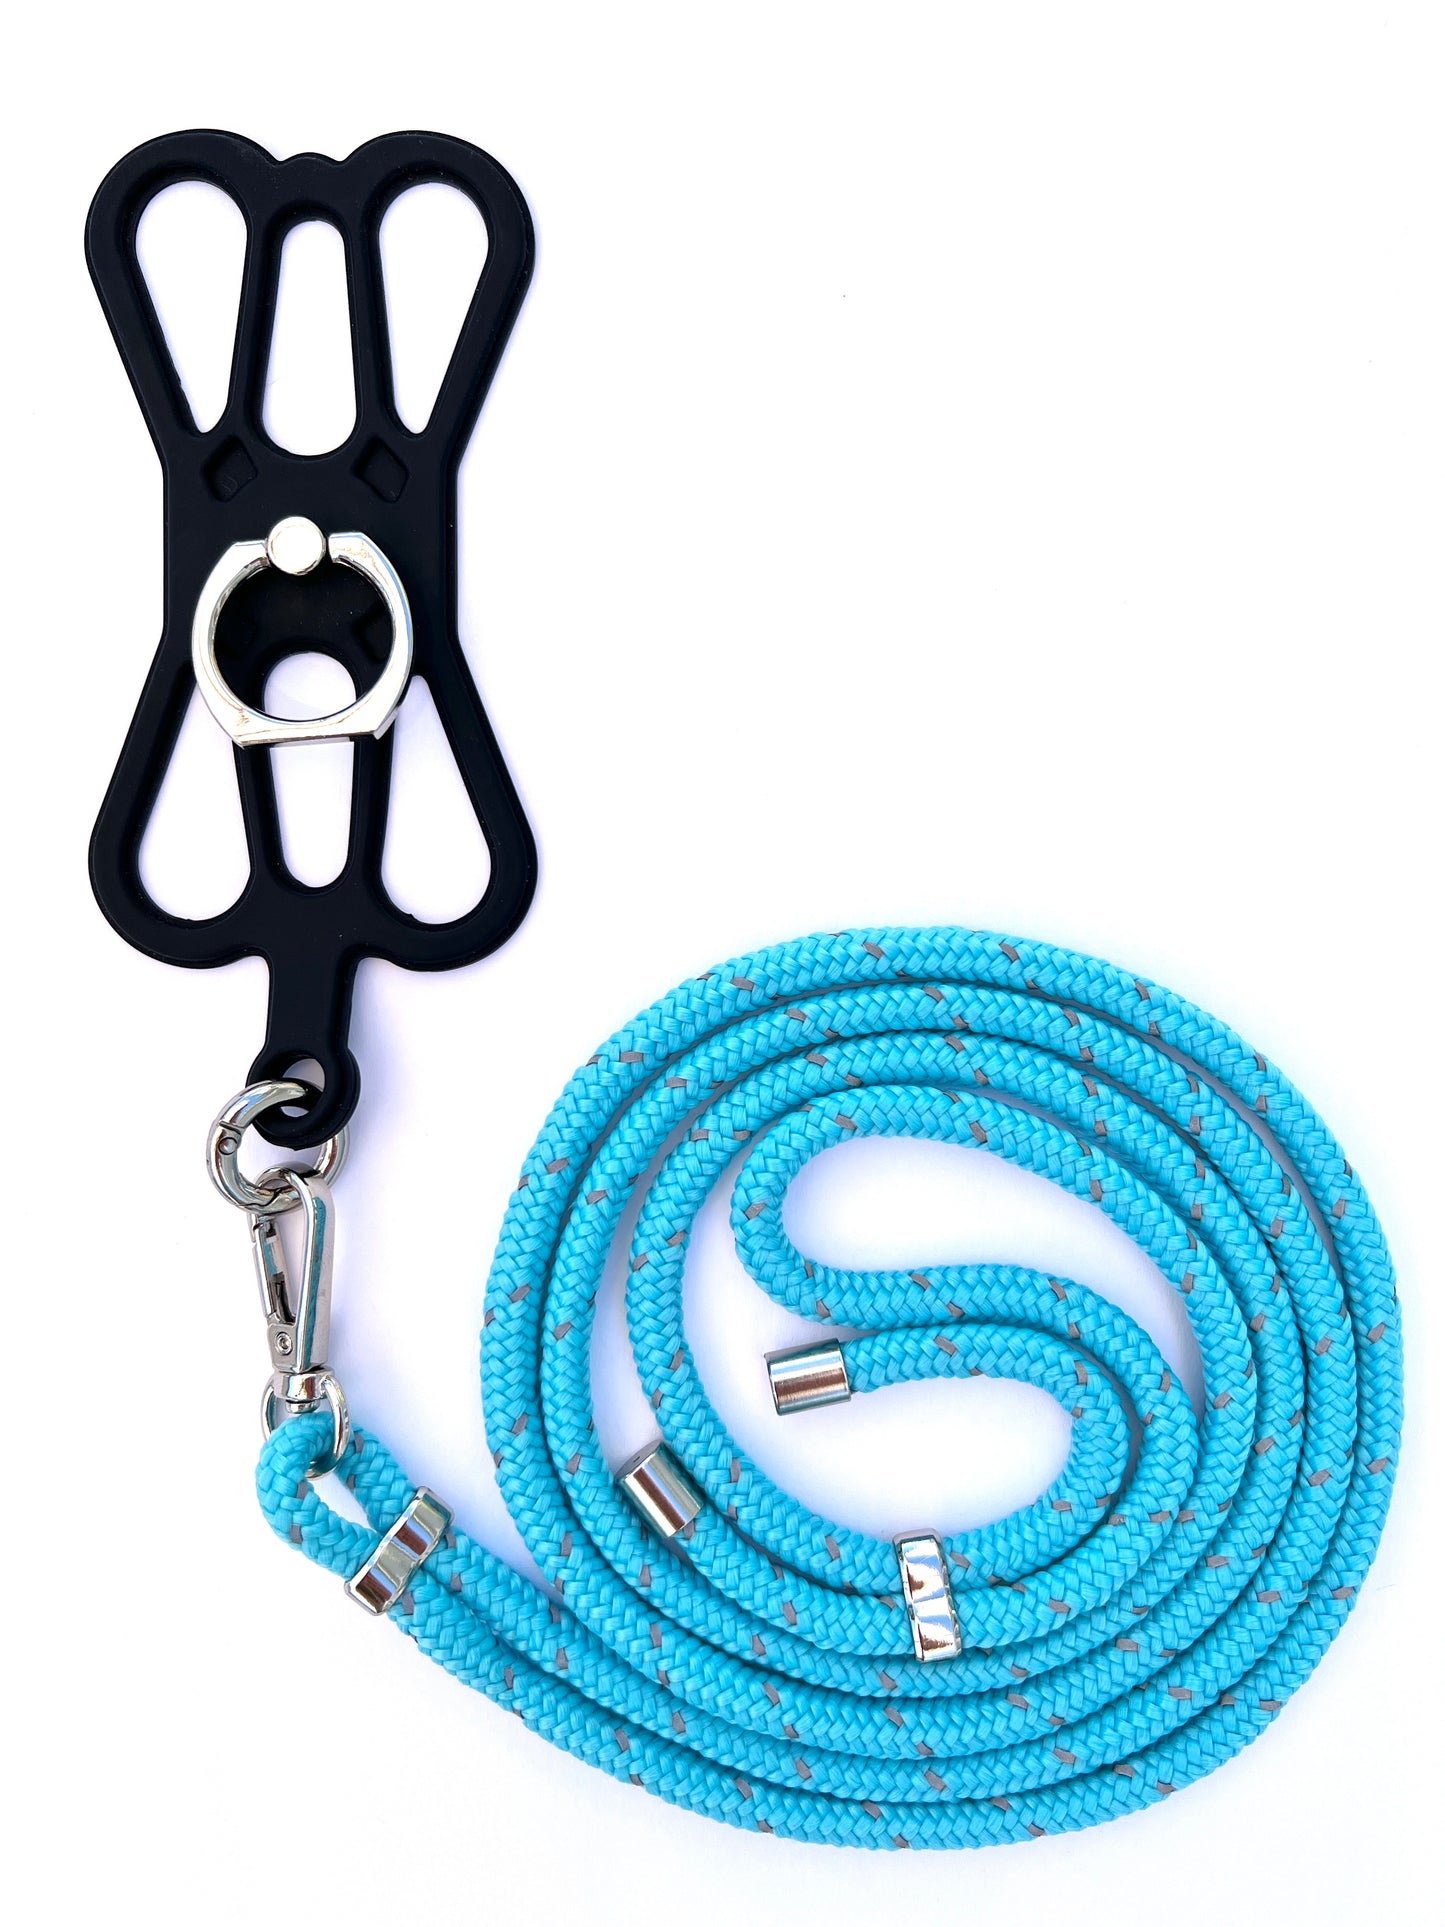 Silicon Holder Phone Strap - Turquoise Reflective